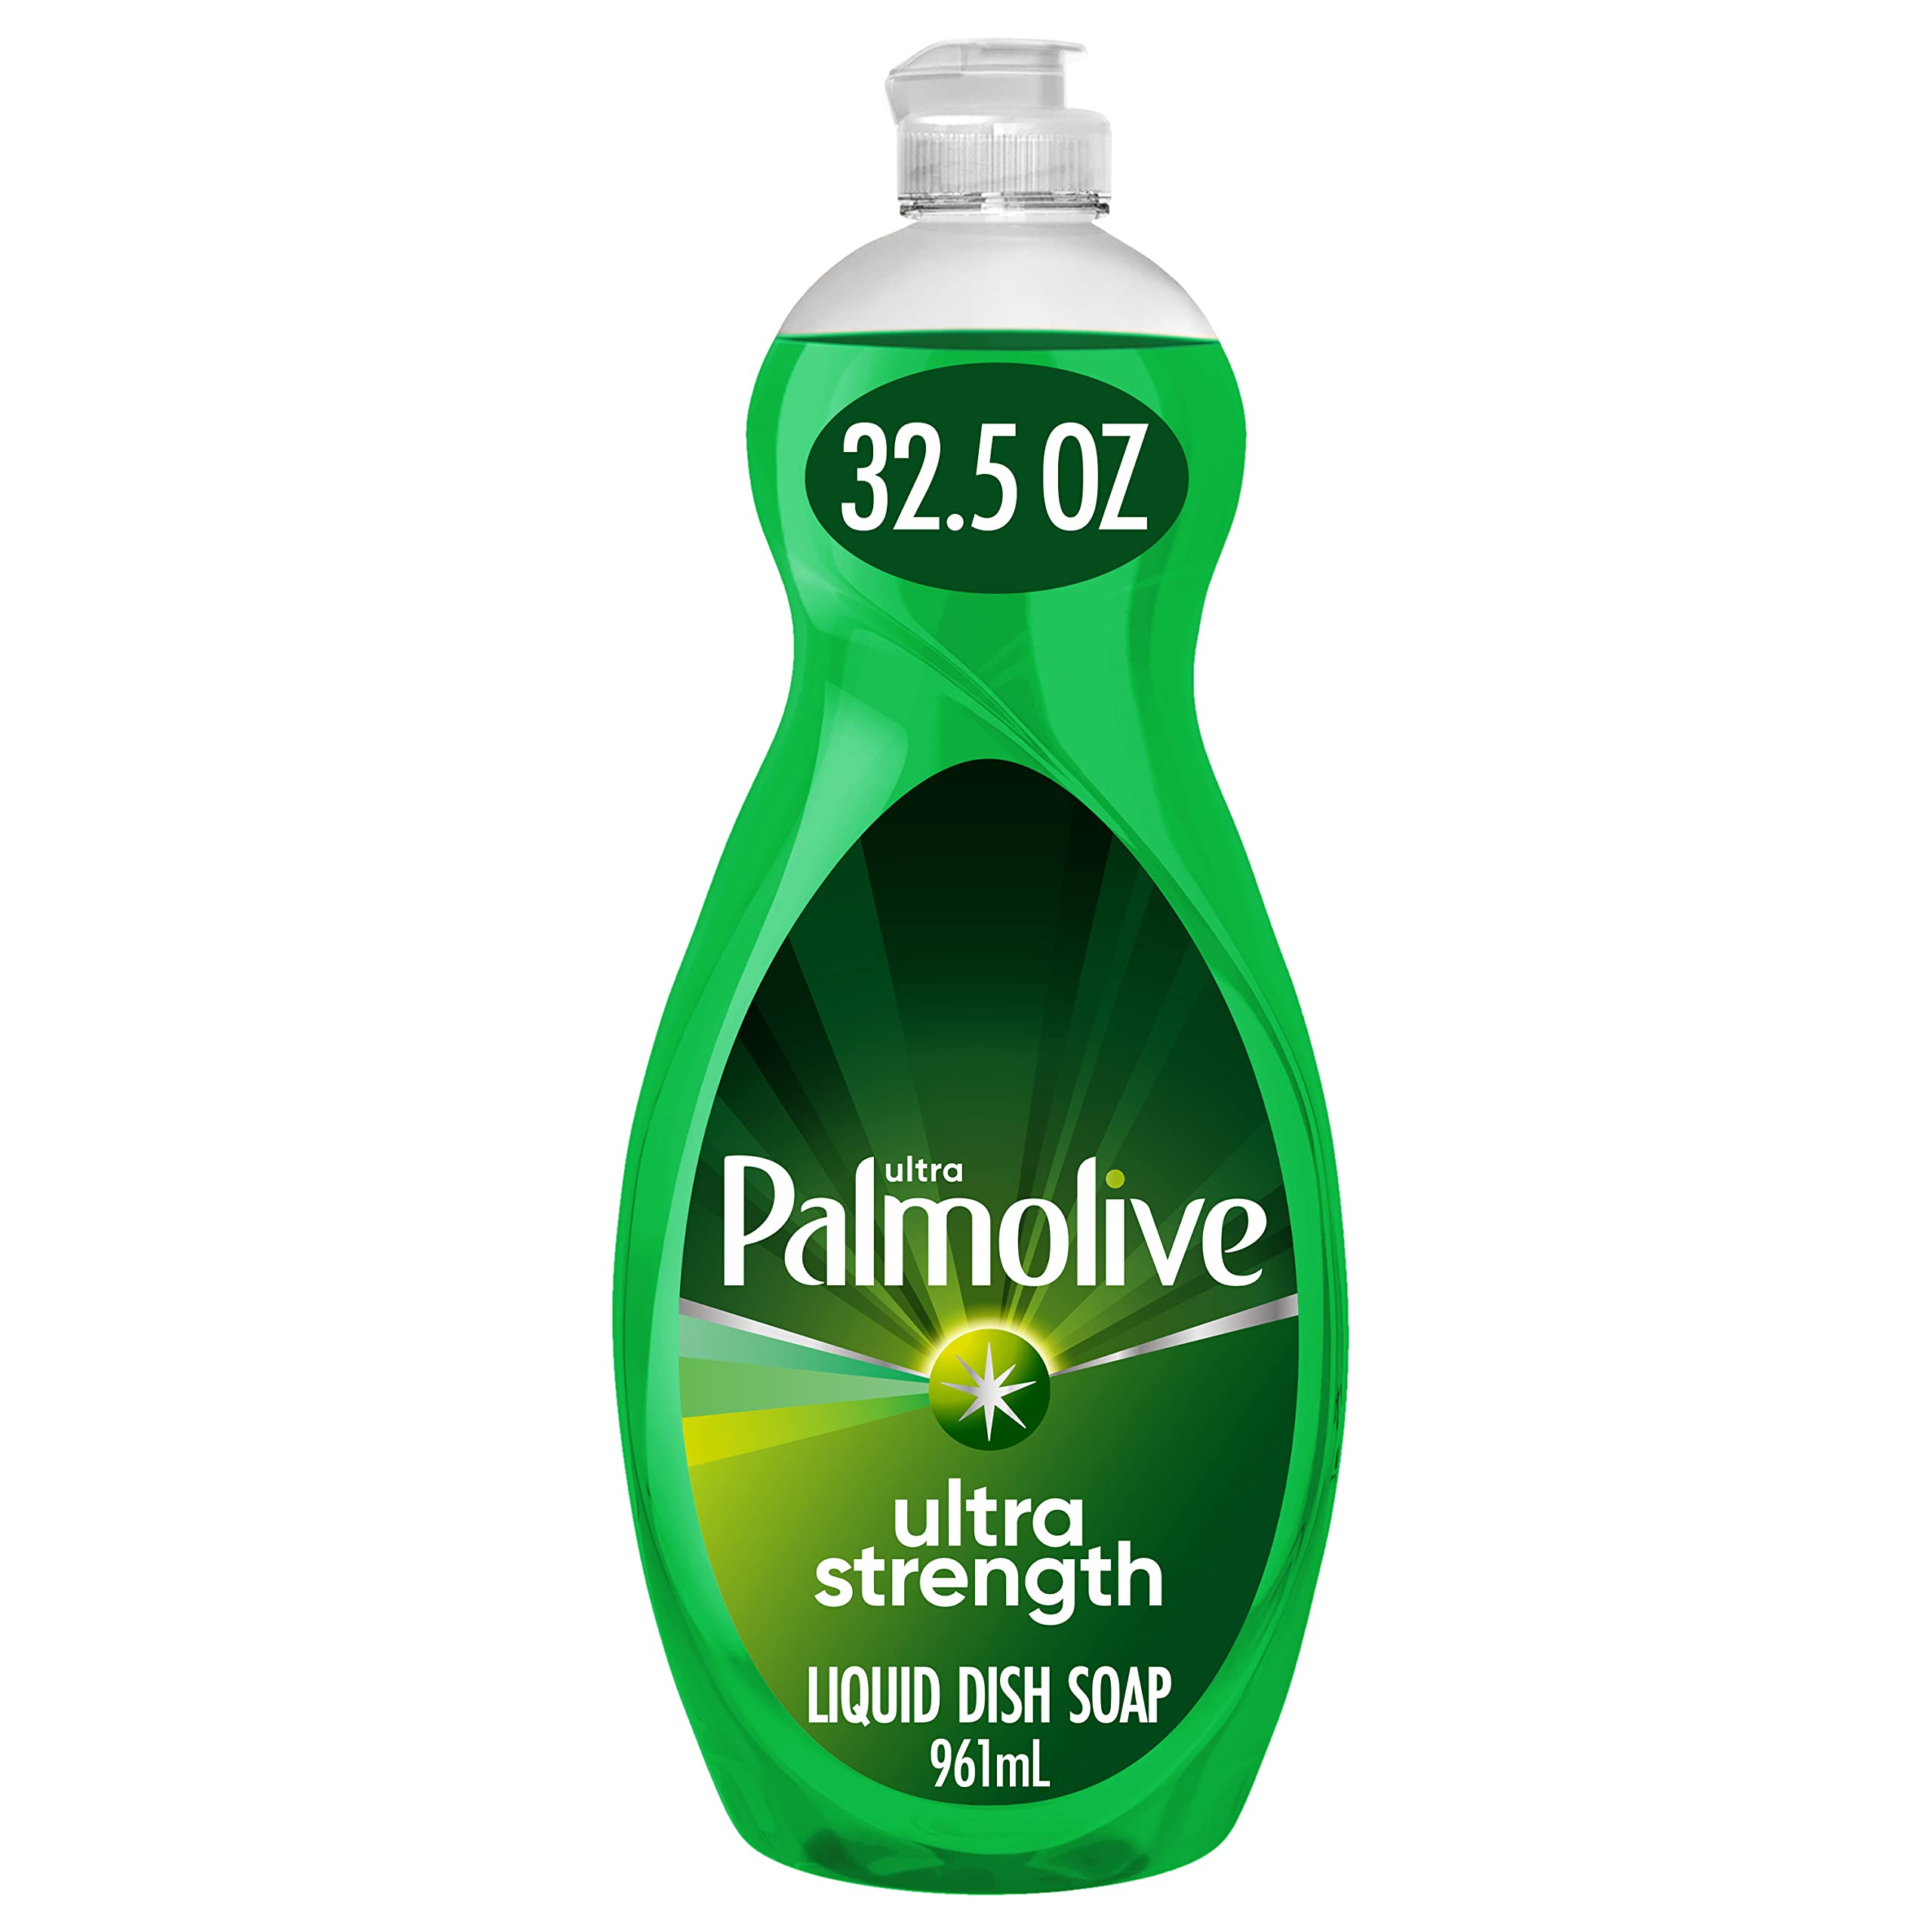 4-Count 32.5-Oz Palmolive Ultra Strength Liquid Dish Soap + 32.5-Oz Palmolive Ultra Dish Liquid Oxy Power Degreaser $14.14 w/ S&S + Free Shipping w/ Prime or on $35+